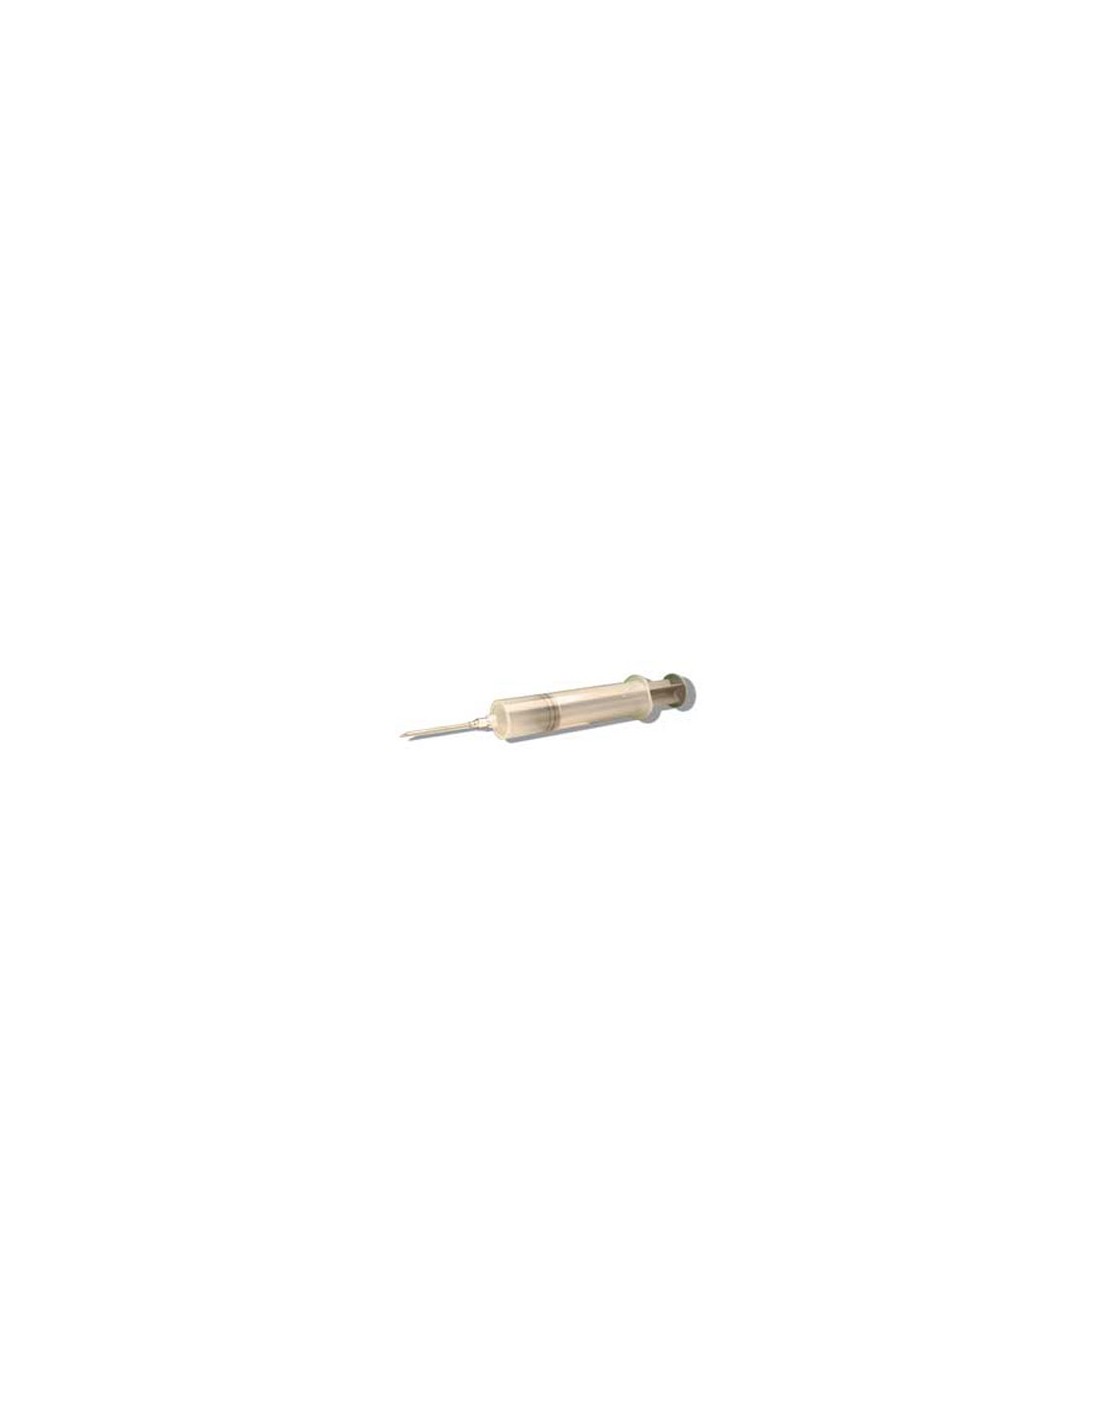 Crane Stainless Steel Needle Injector Questions & Answers